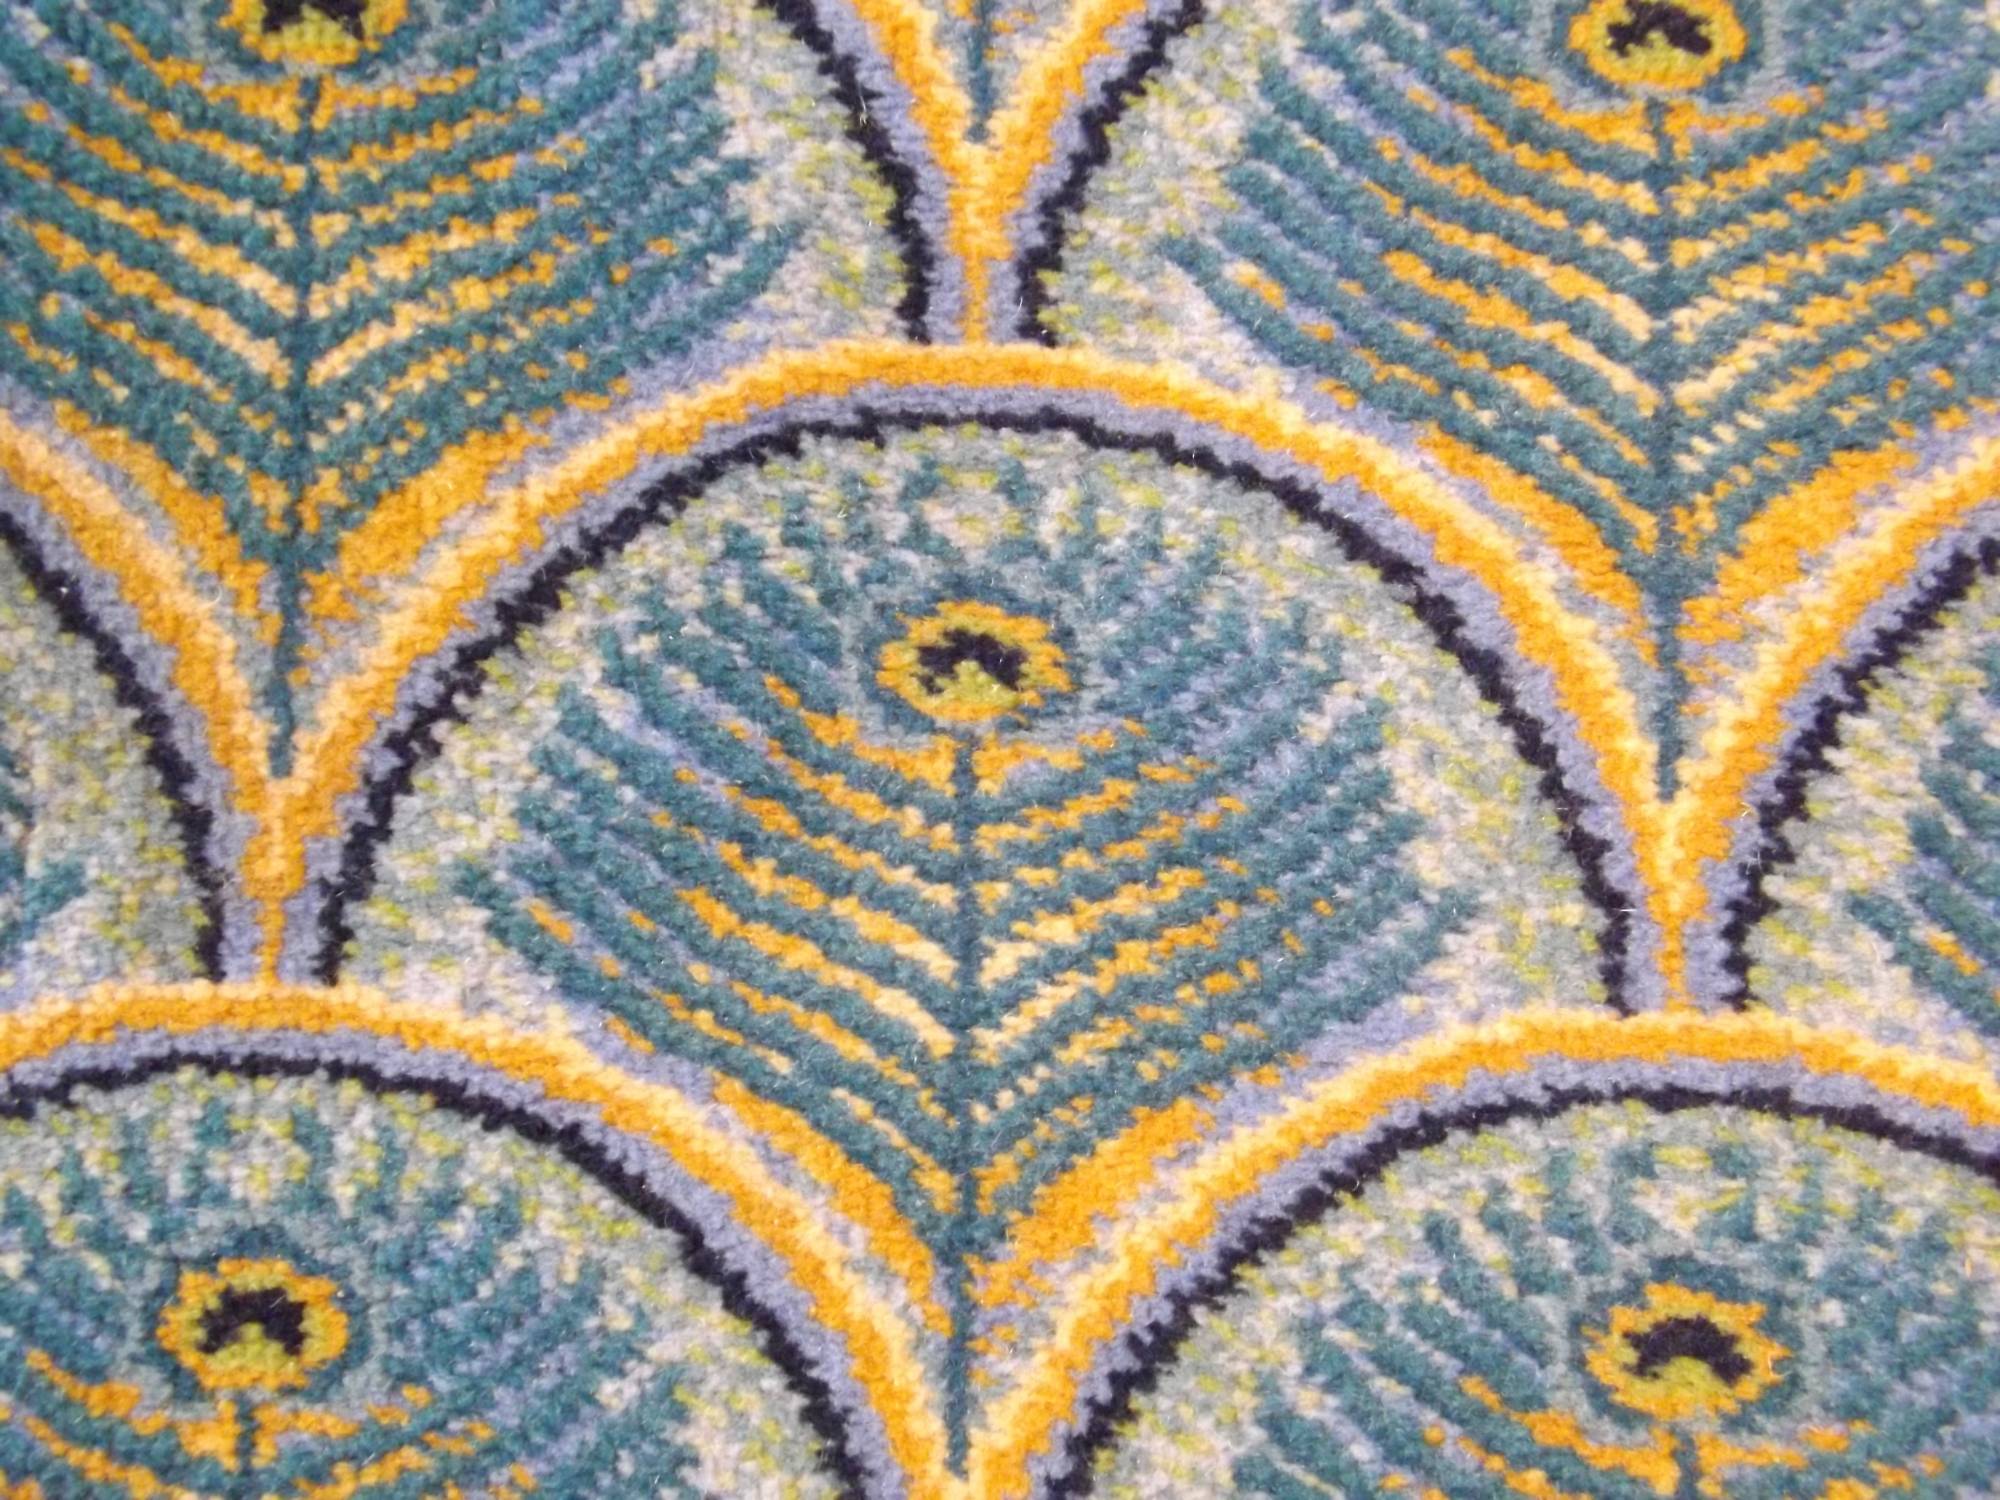 Peacock Feather Designs in carpet at Shutters